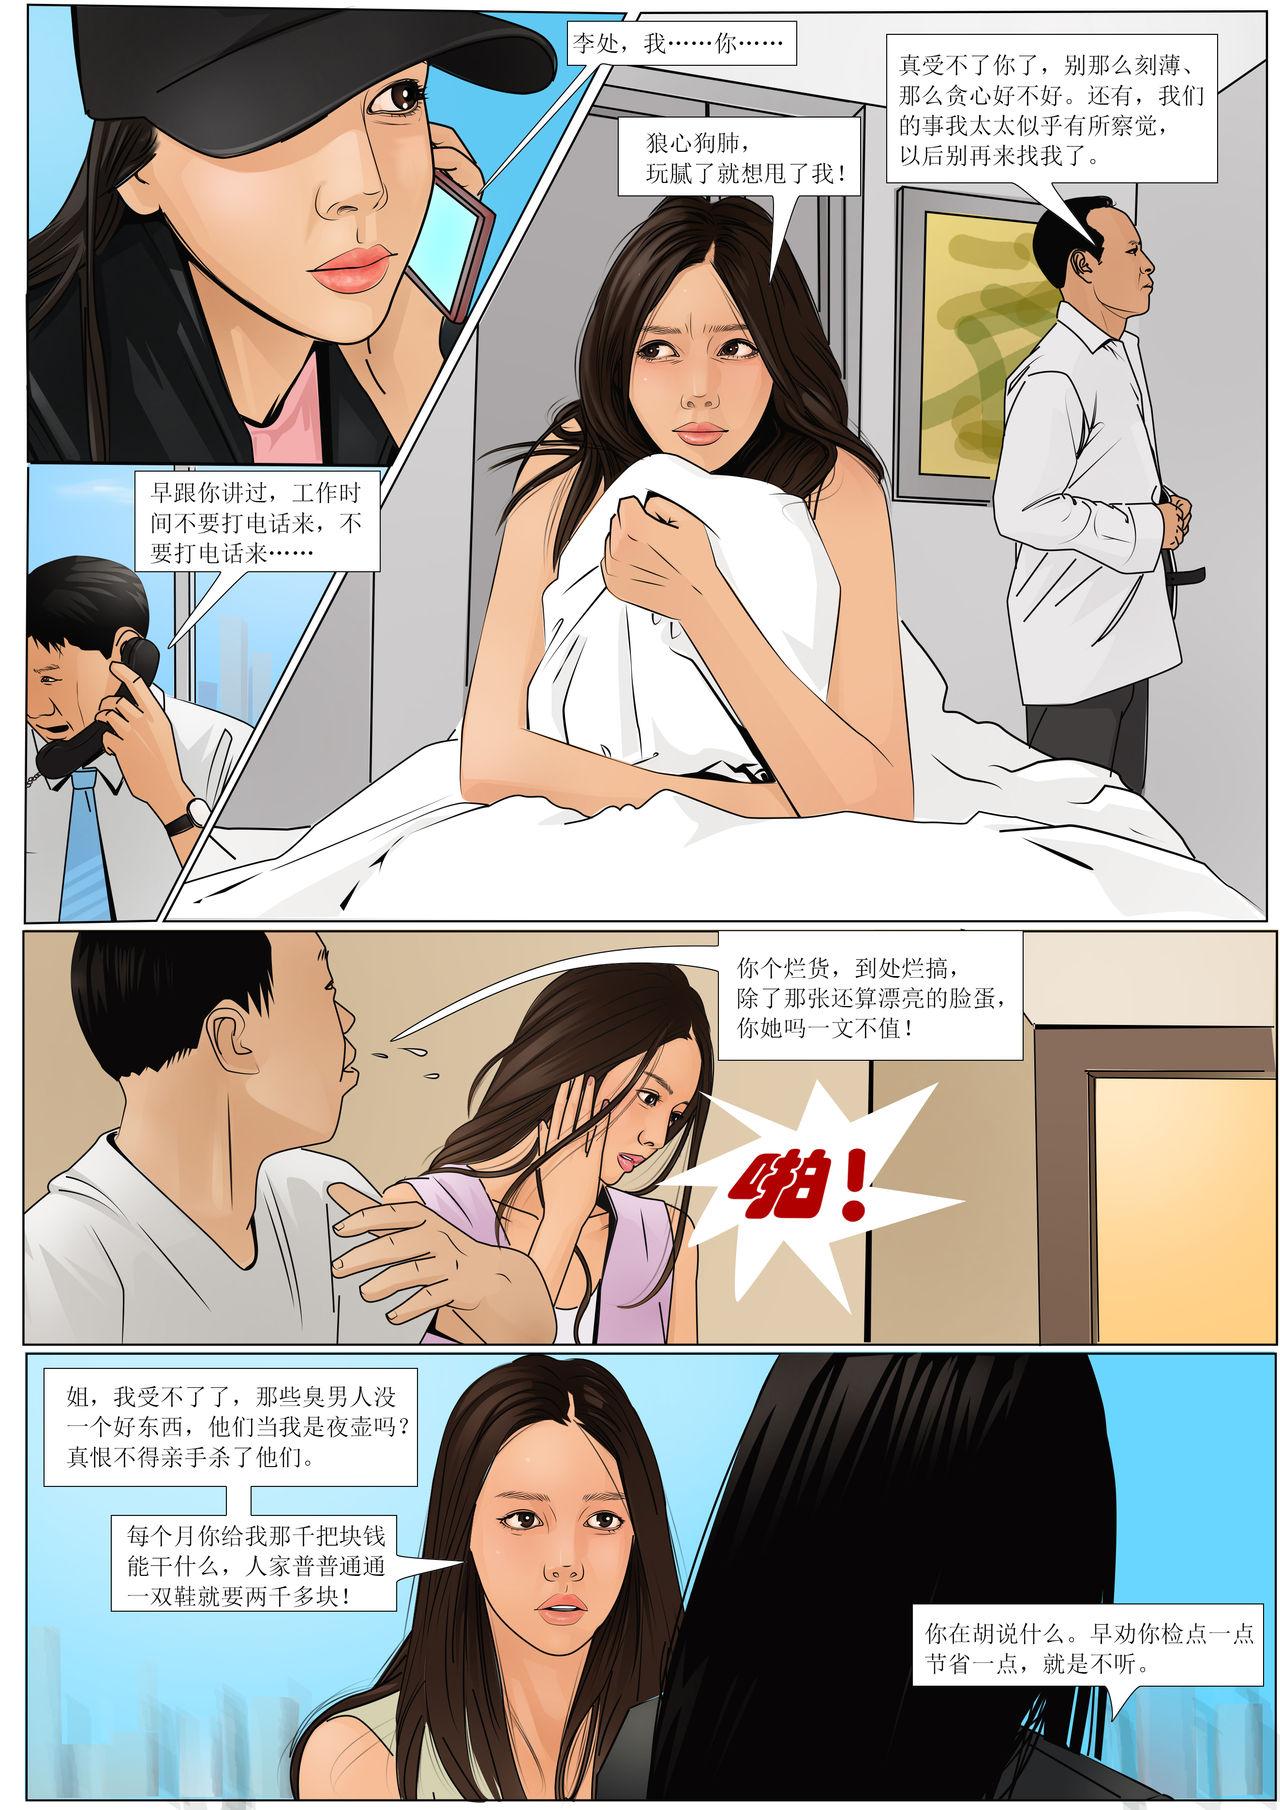 Italian 枫语漫画 Foryou 《极度重犯》第八话 Three Female Prisoners 8 Chinese Parties - Page 5